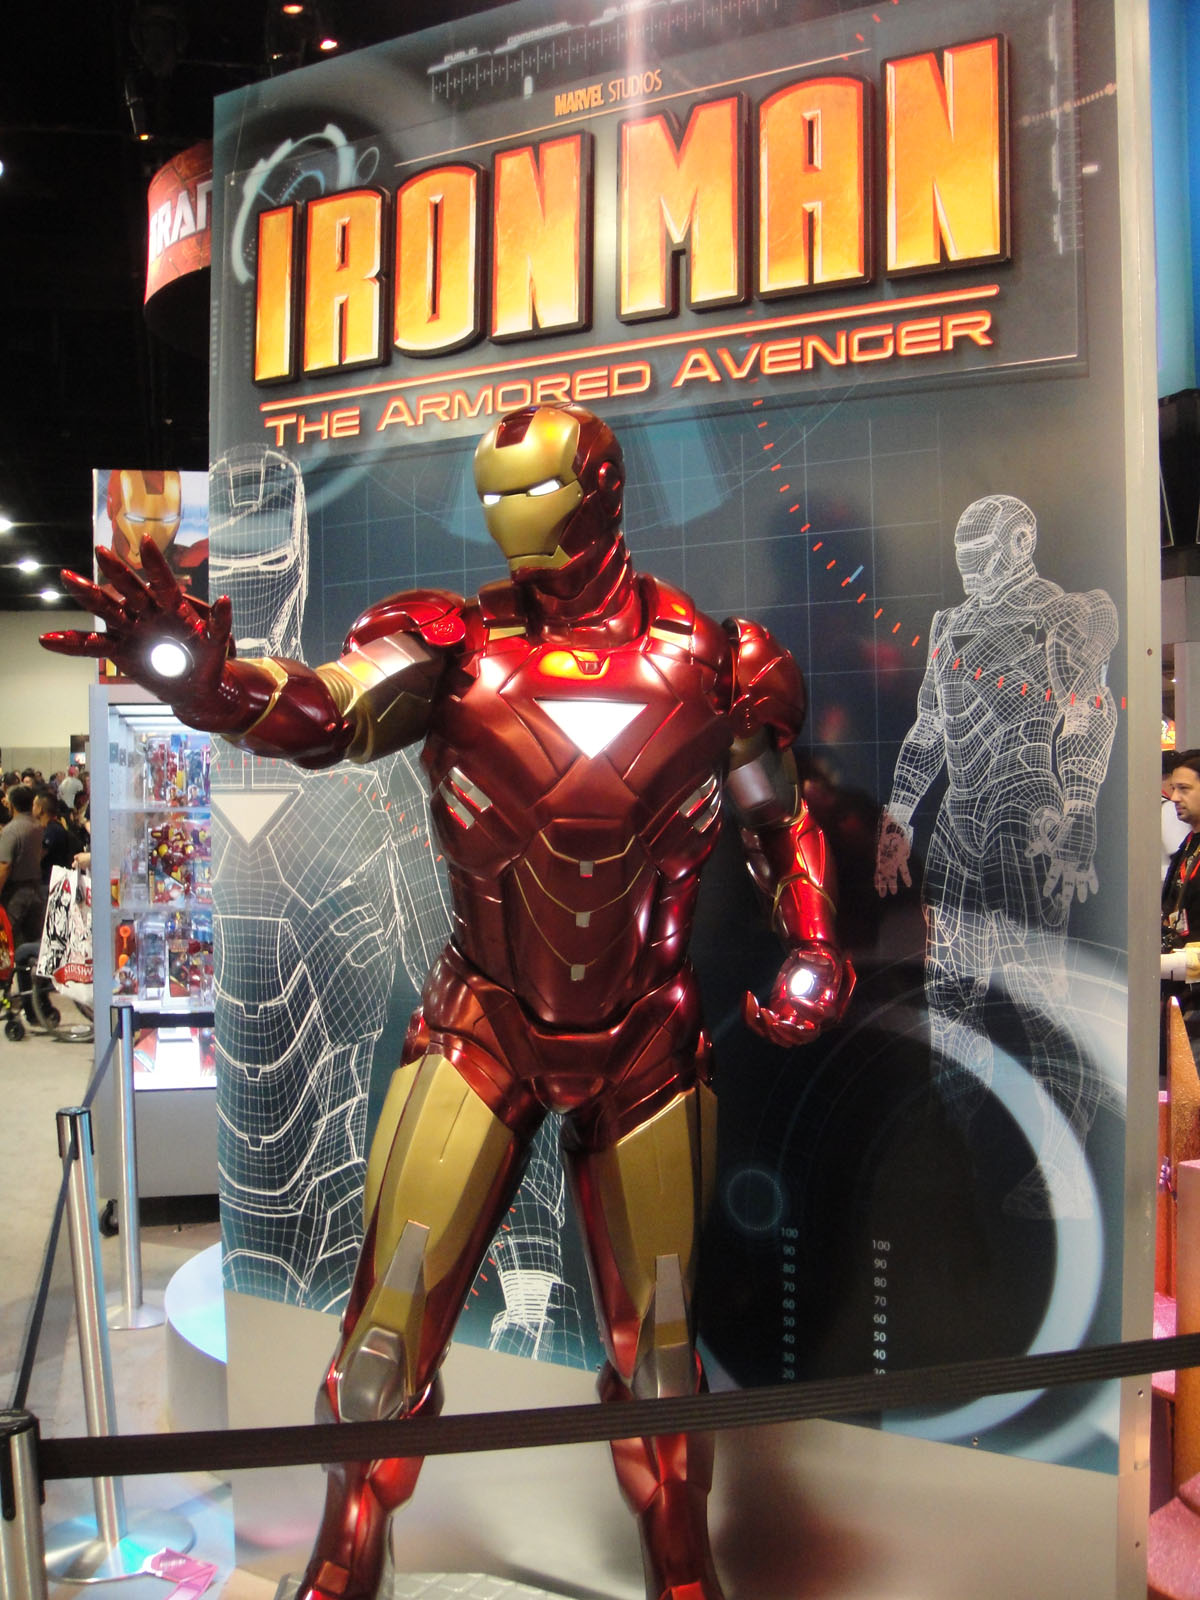 a costume made to look like iron man